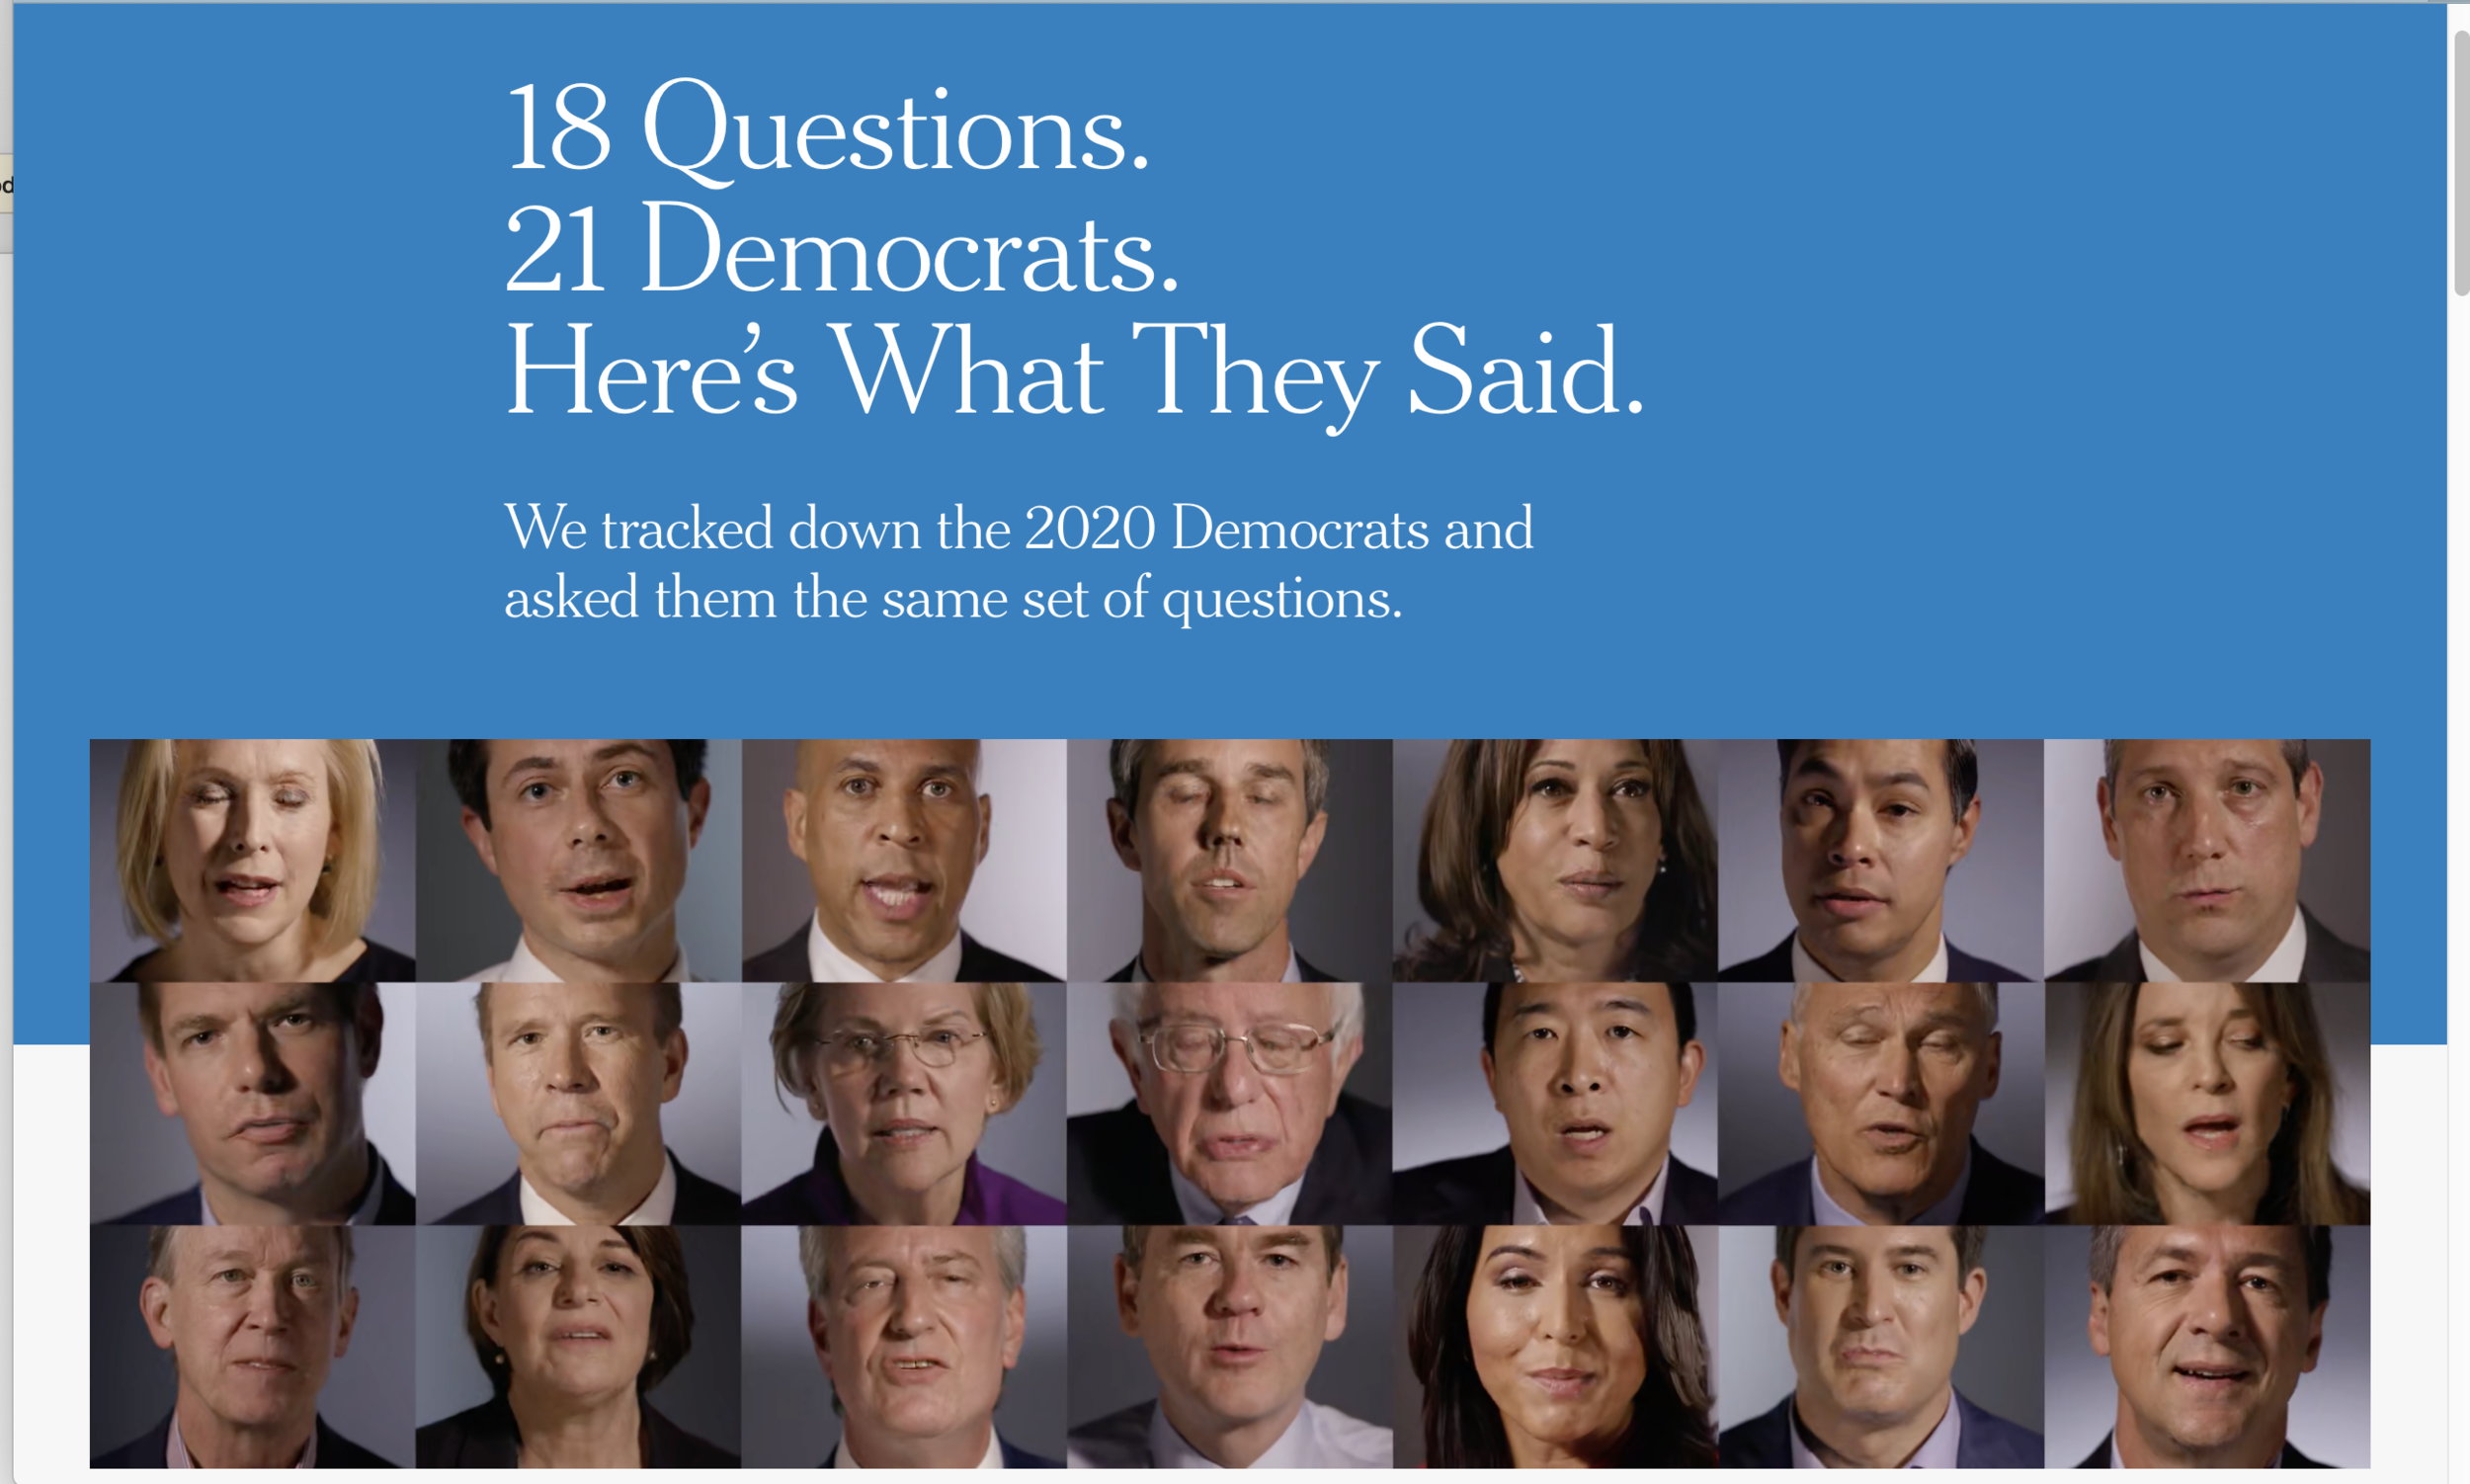 18 Questions. 21 Candidates. Here's What They Said. - The New York Times